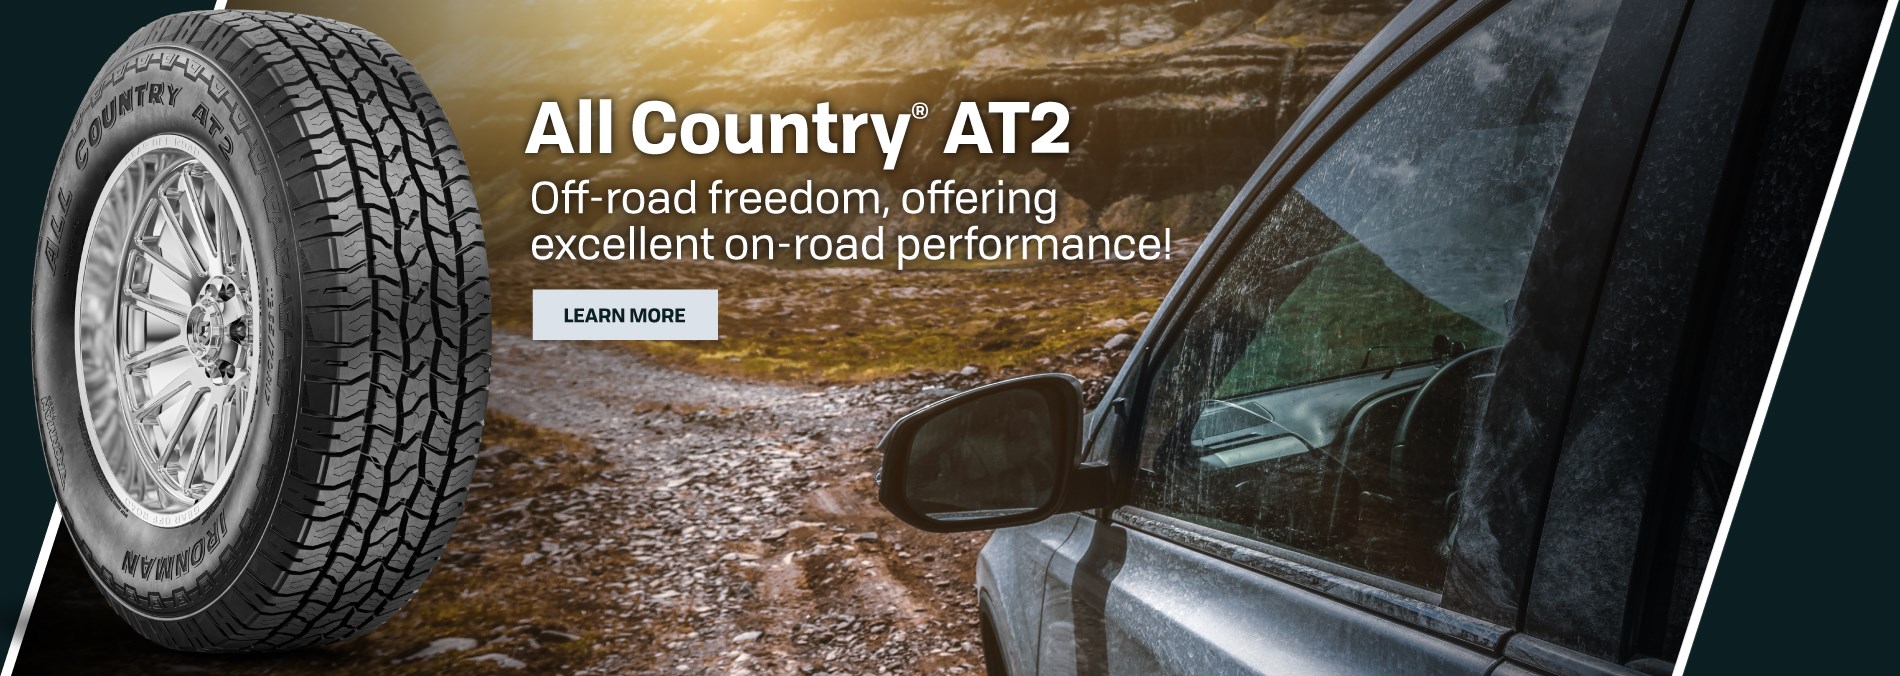 Hercules Tire All Country A/T